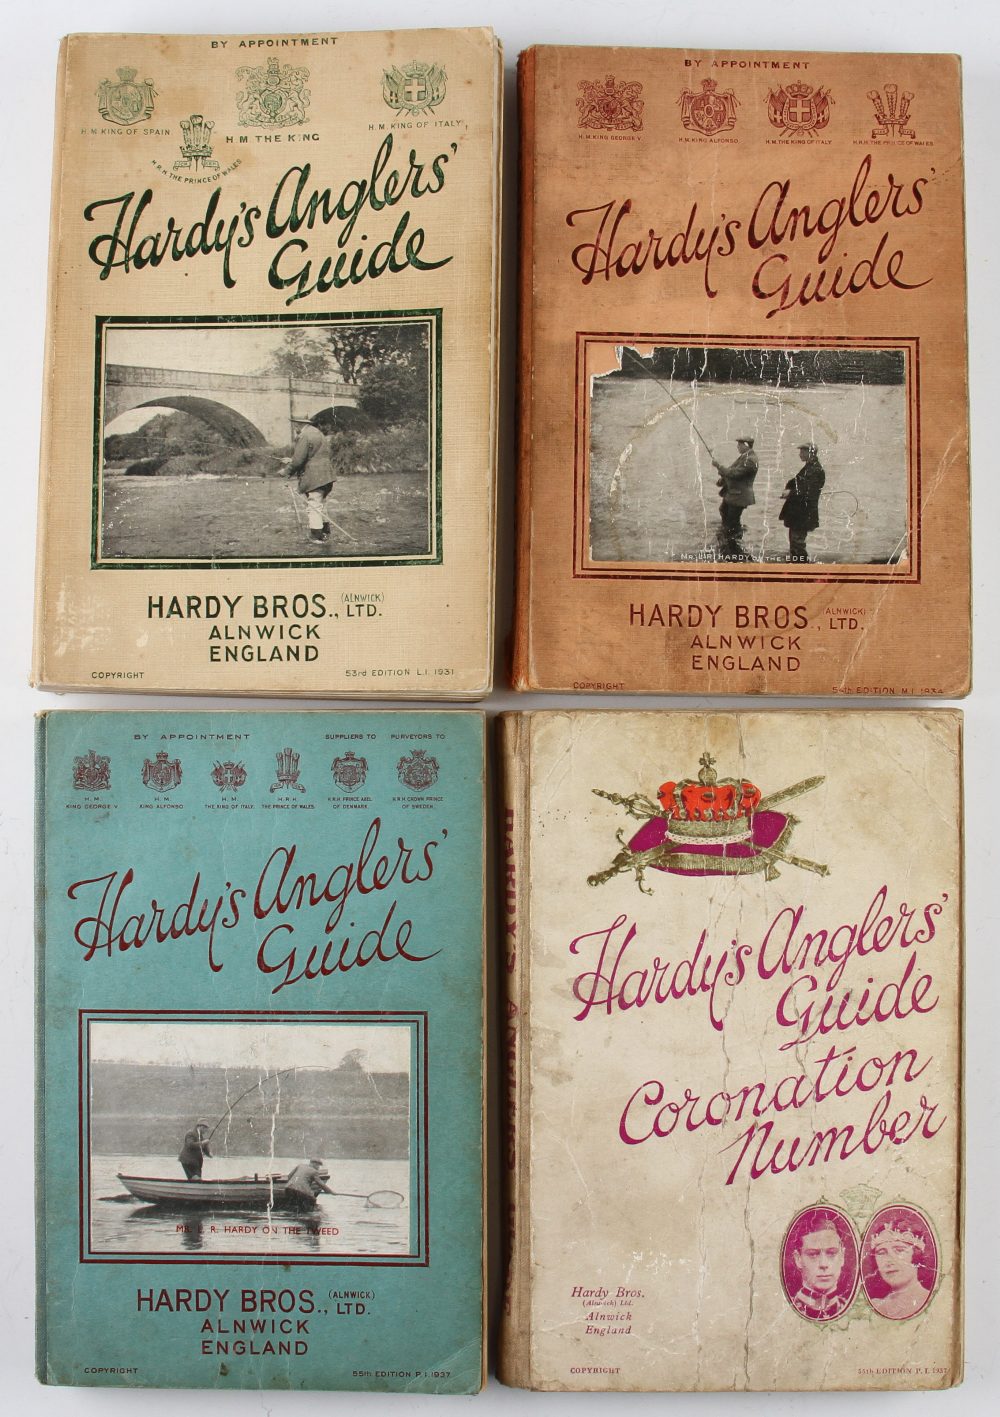 Hardy's Anglers' Guides 1931, 1934, 1937 and 1937 Coronation Number 53rd-55th Editions generally all